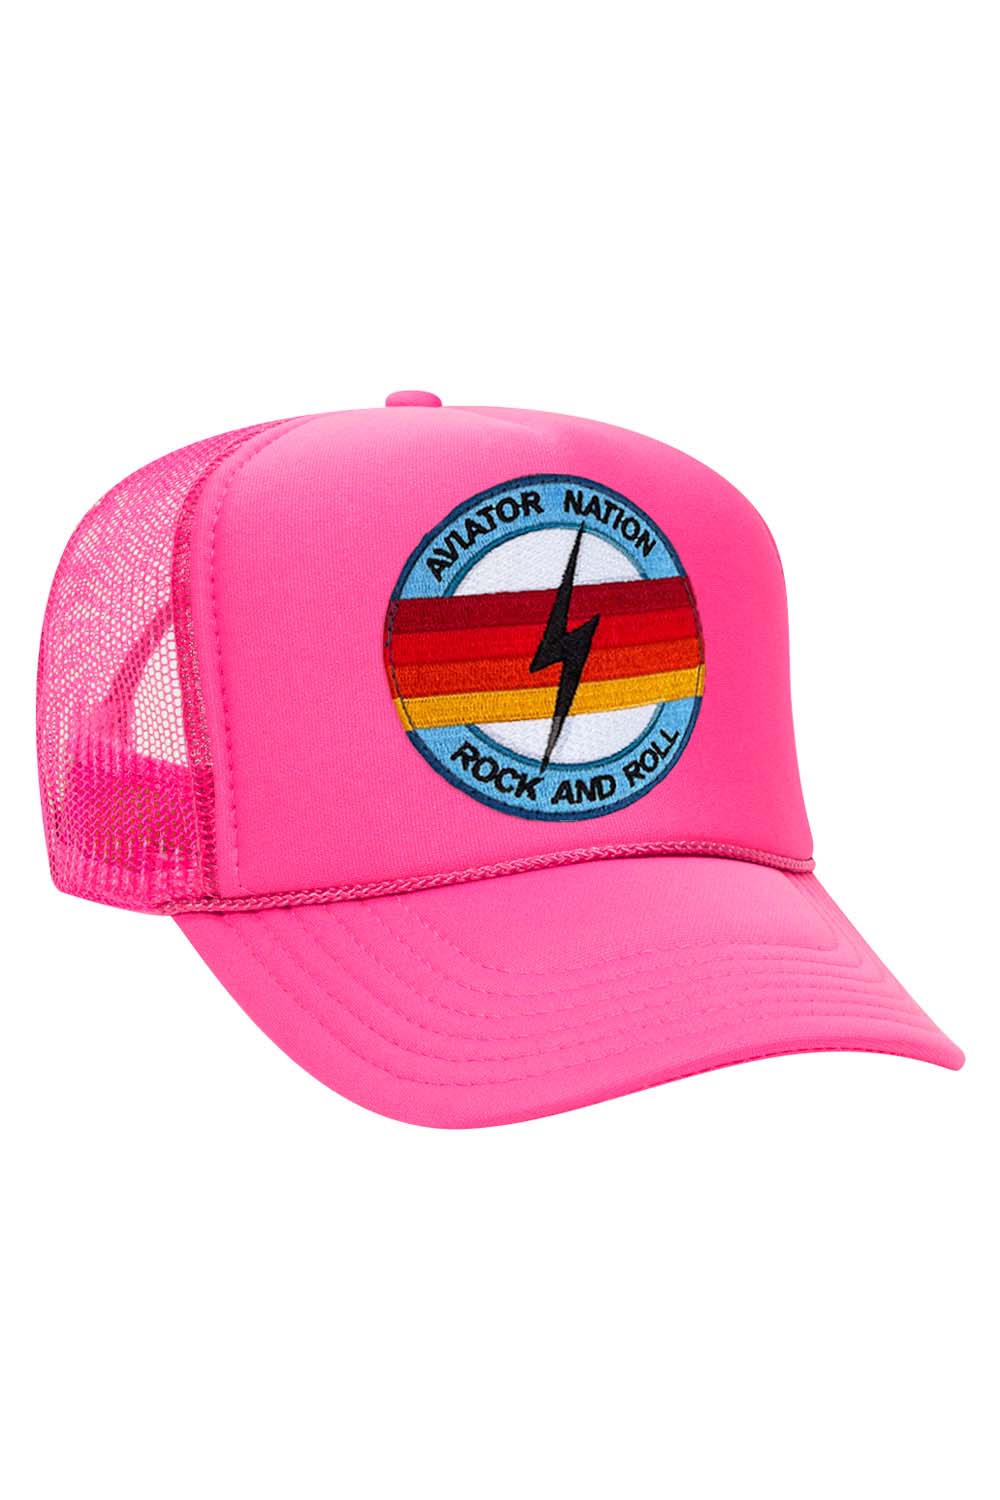 ROCK AND ROLL BOLT VINTAGE TRUCKER HAT HATS Aviator Nation NEON PINK 